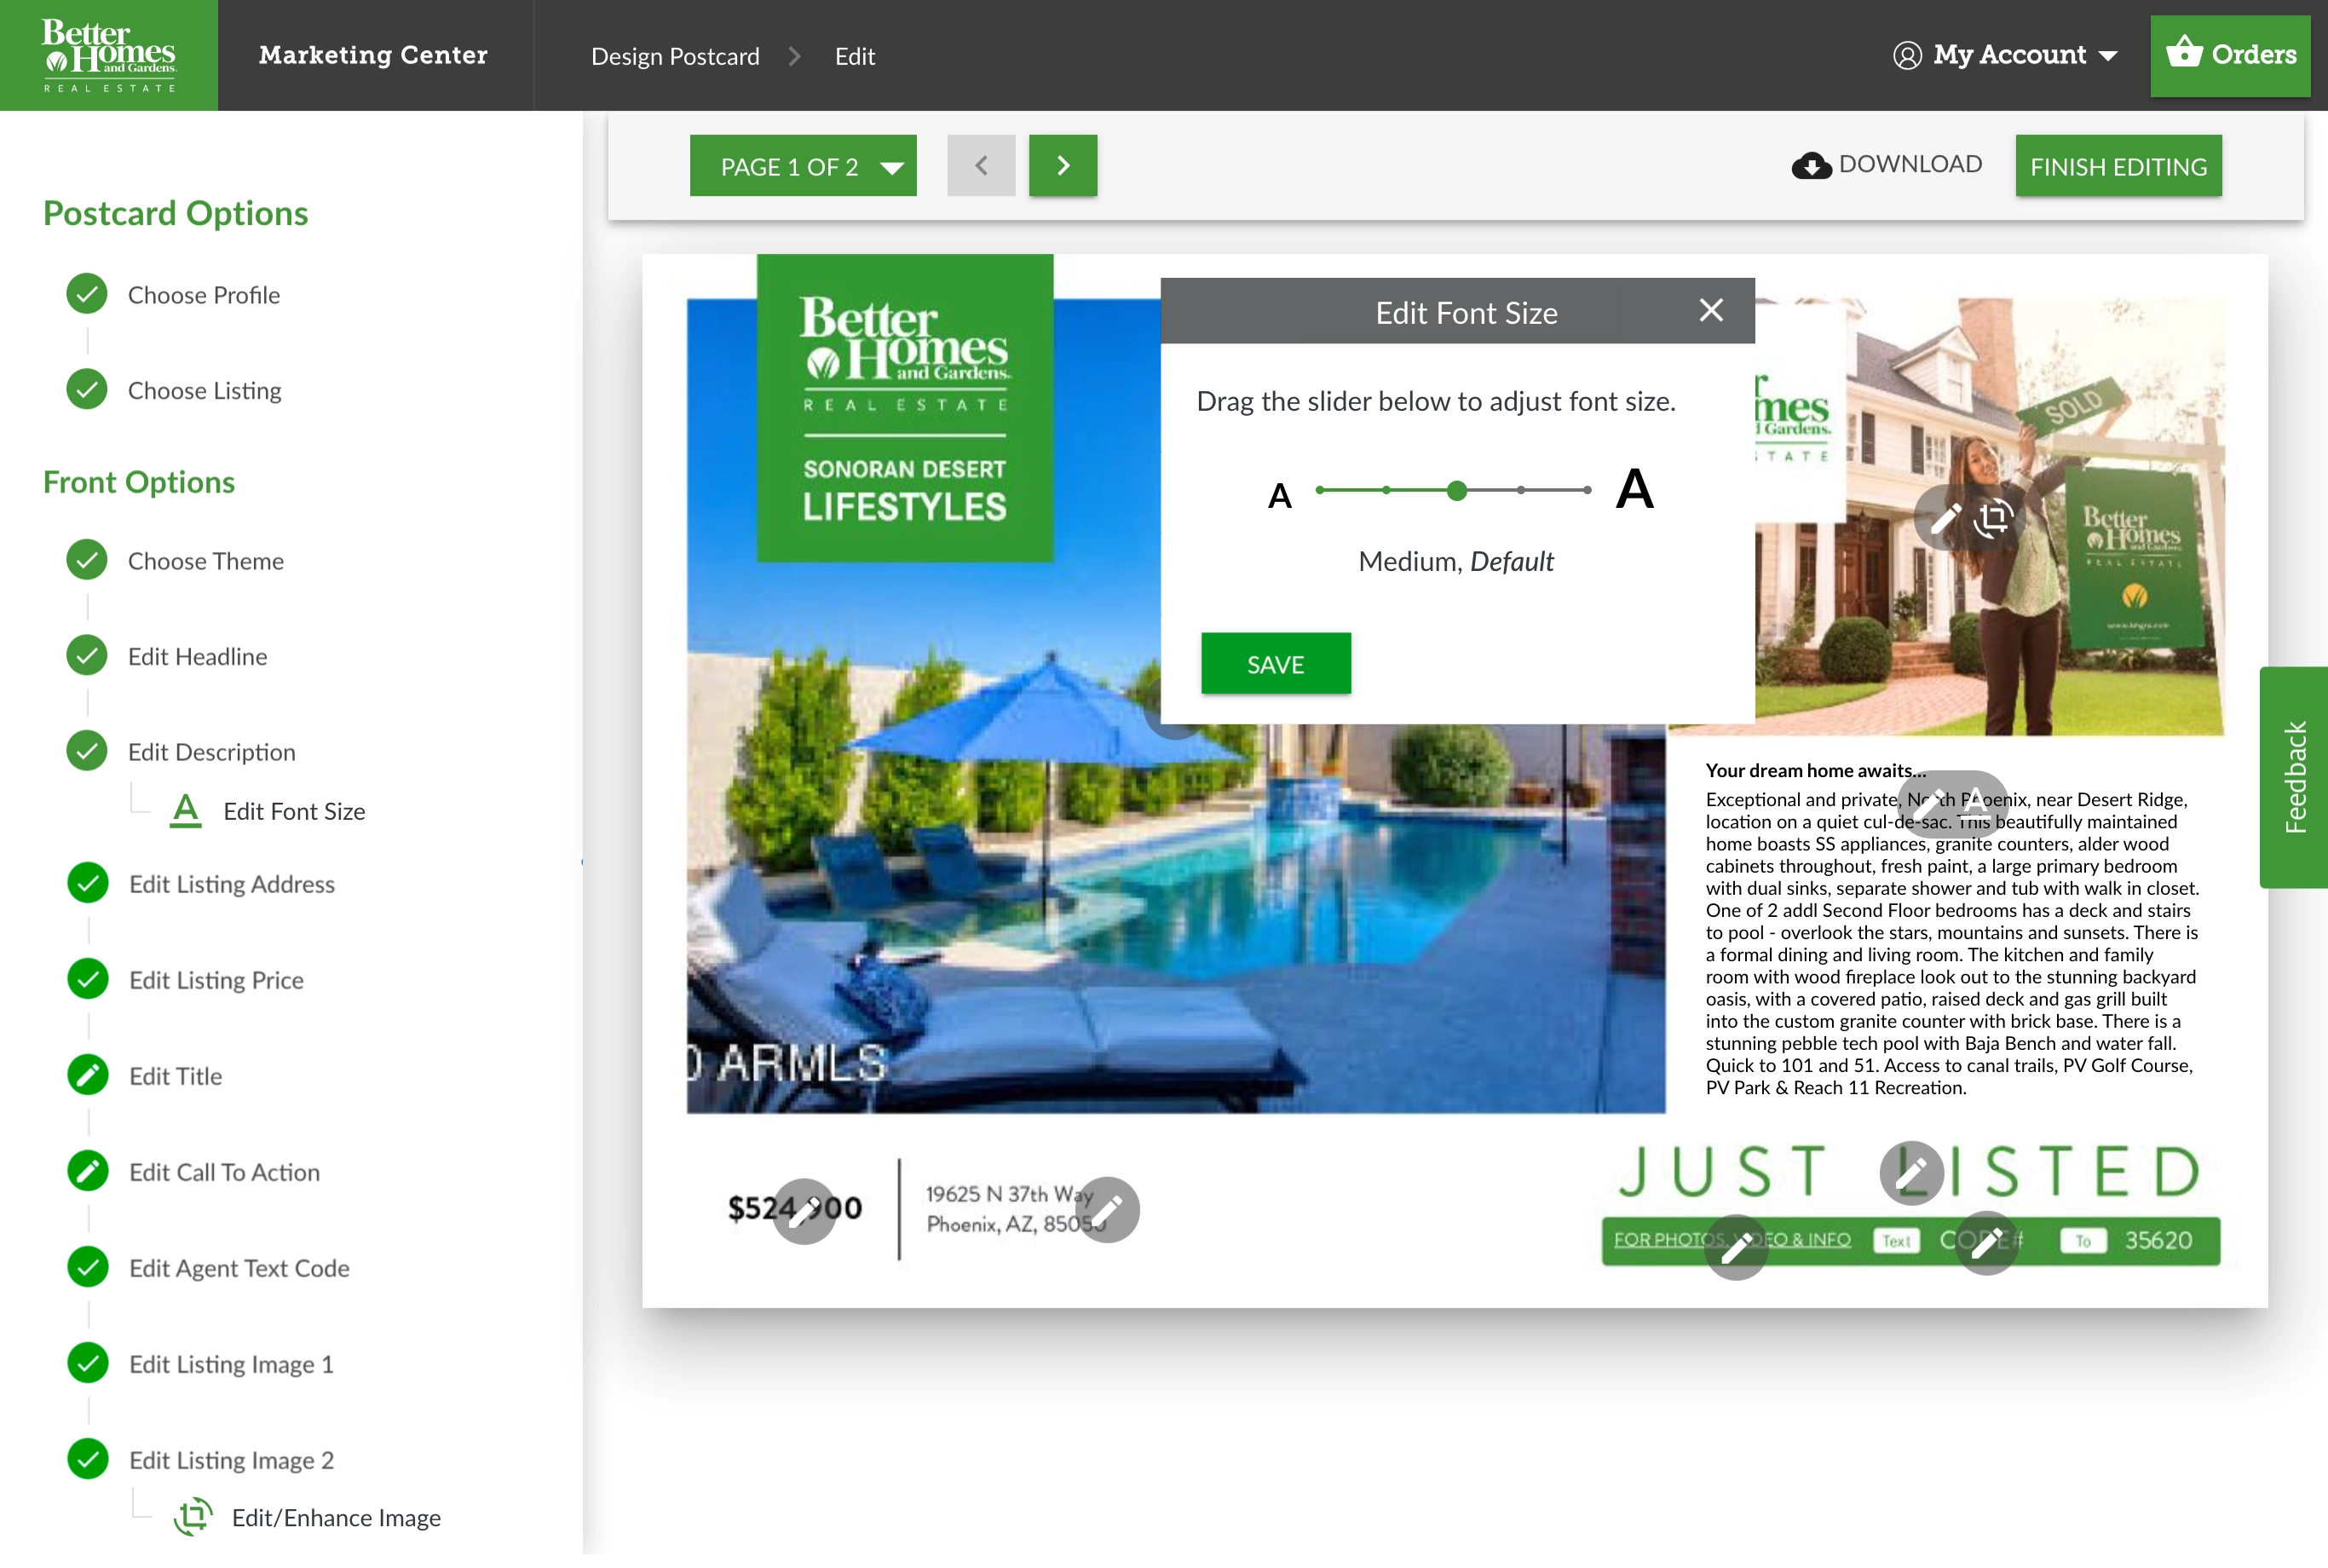 A screenshot of the BHGRE Marketing center app postcard function